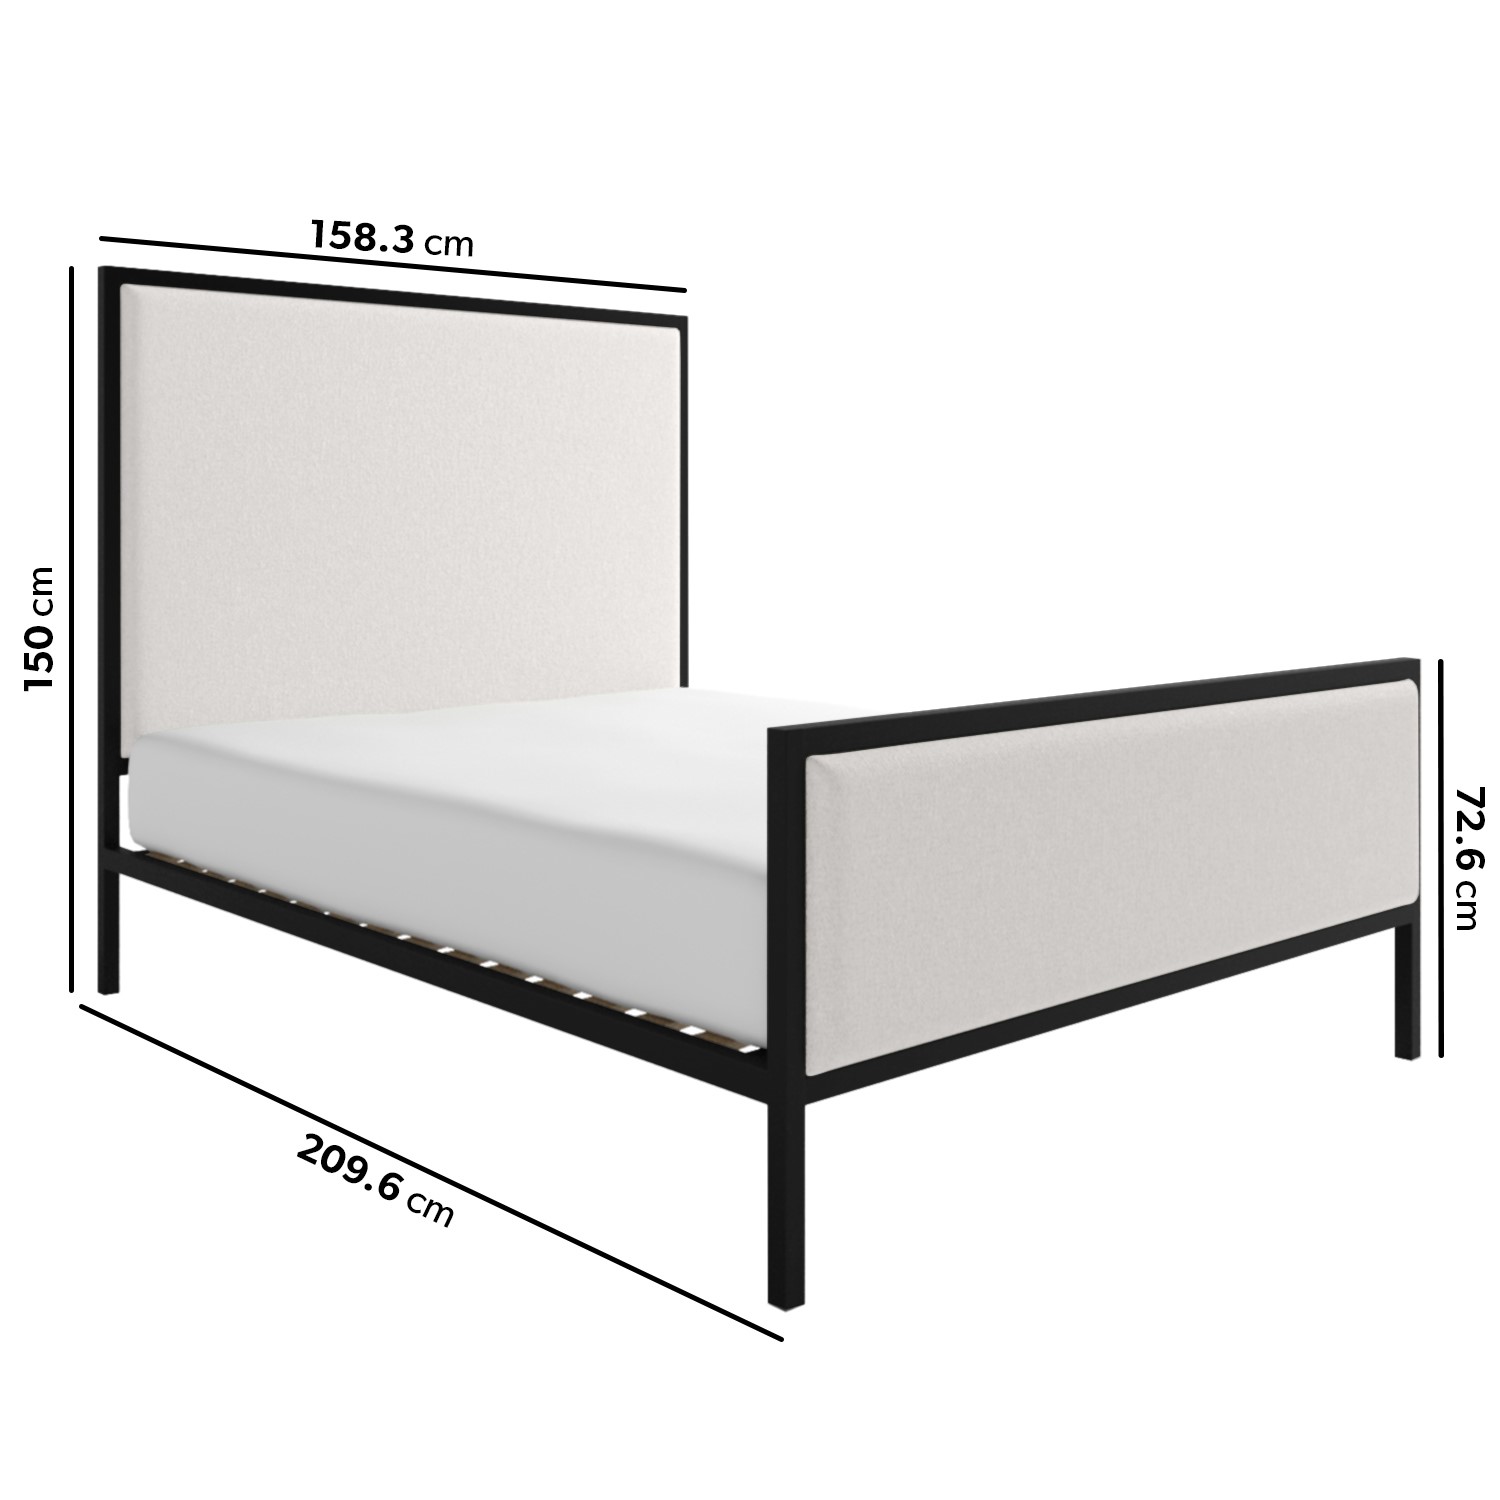 Read more about Beige upholstered king size bed with black metal frame alexandra